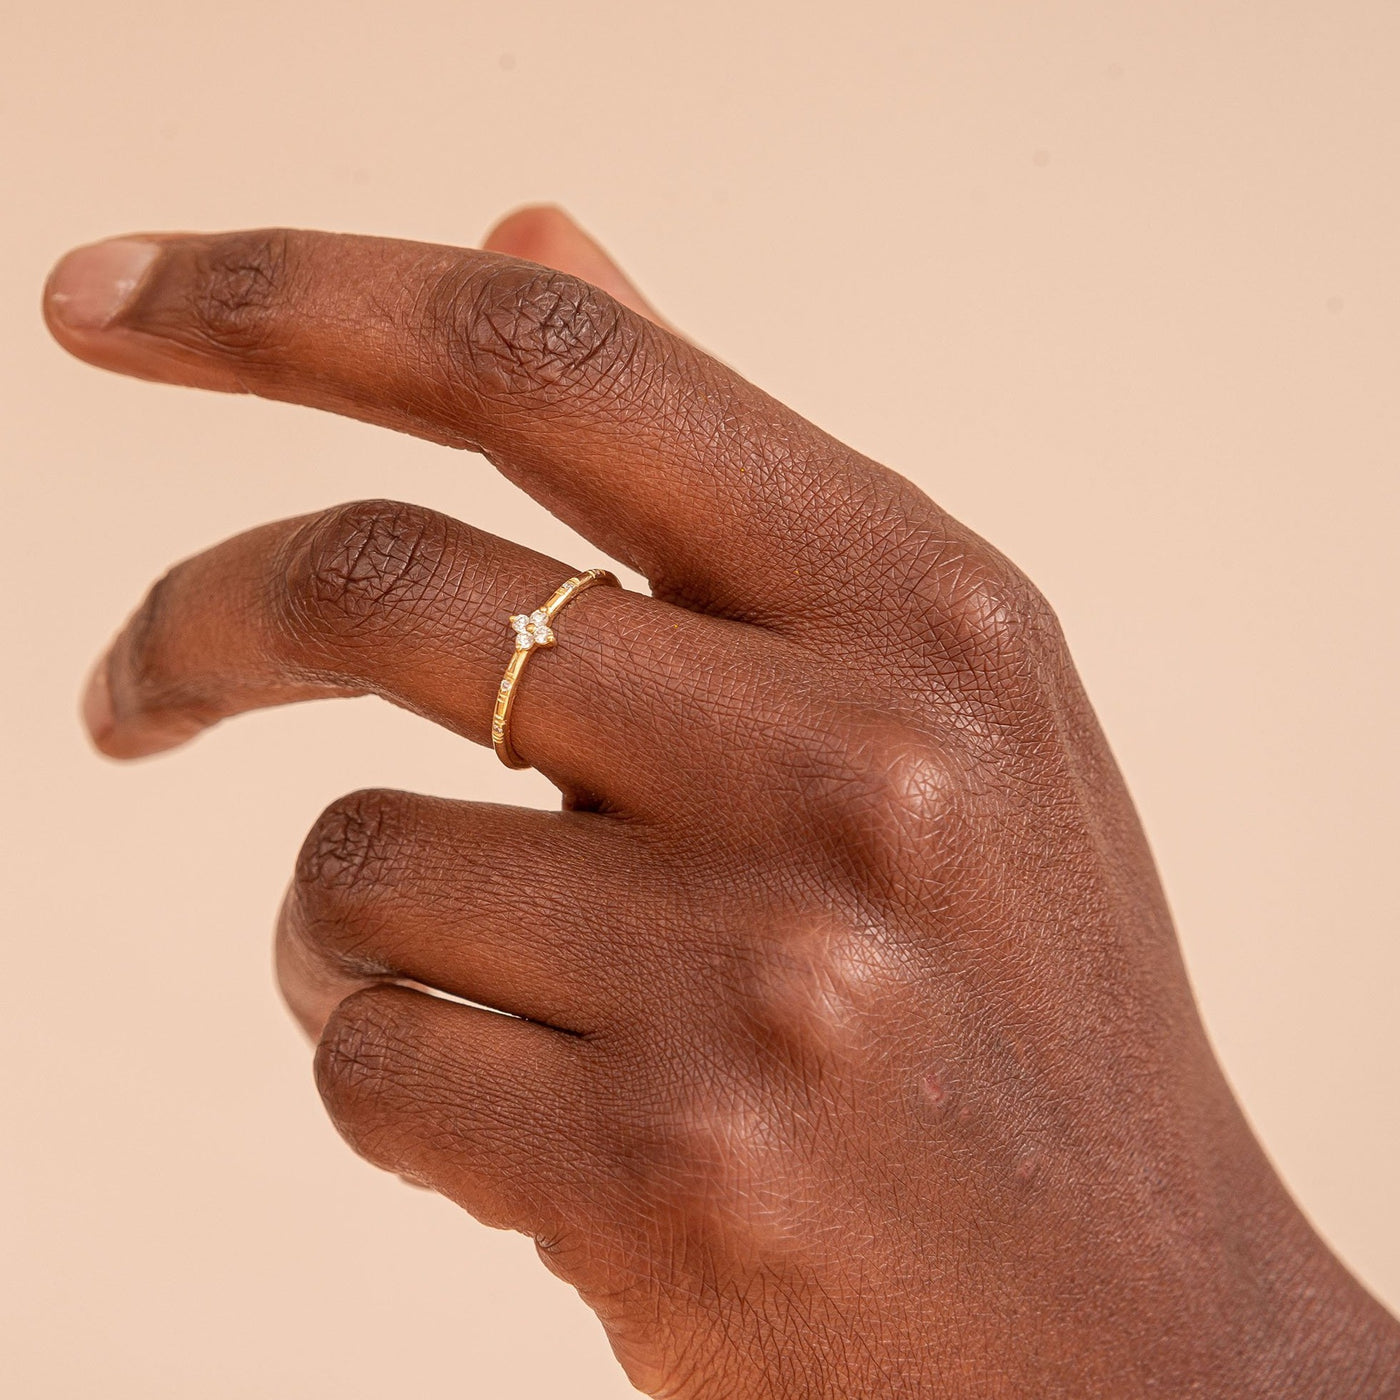 Heather Ring Juna Fae sustainable conscious jewelry 18k recycled gold lab grown diamonds clover diamond stack